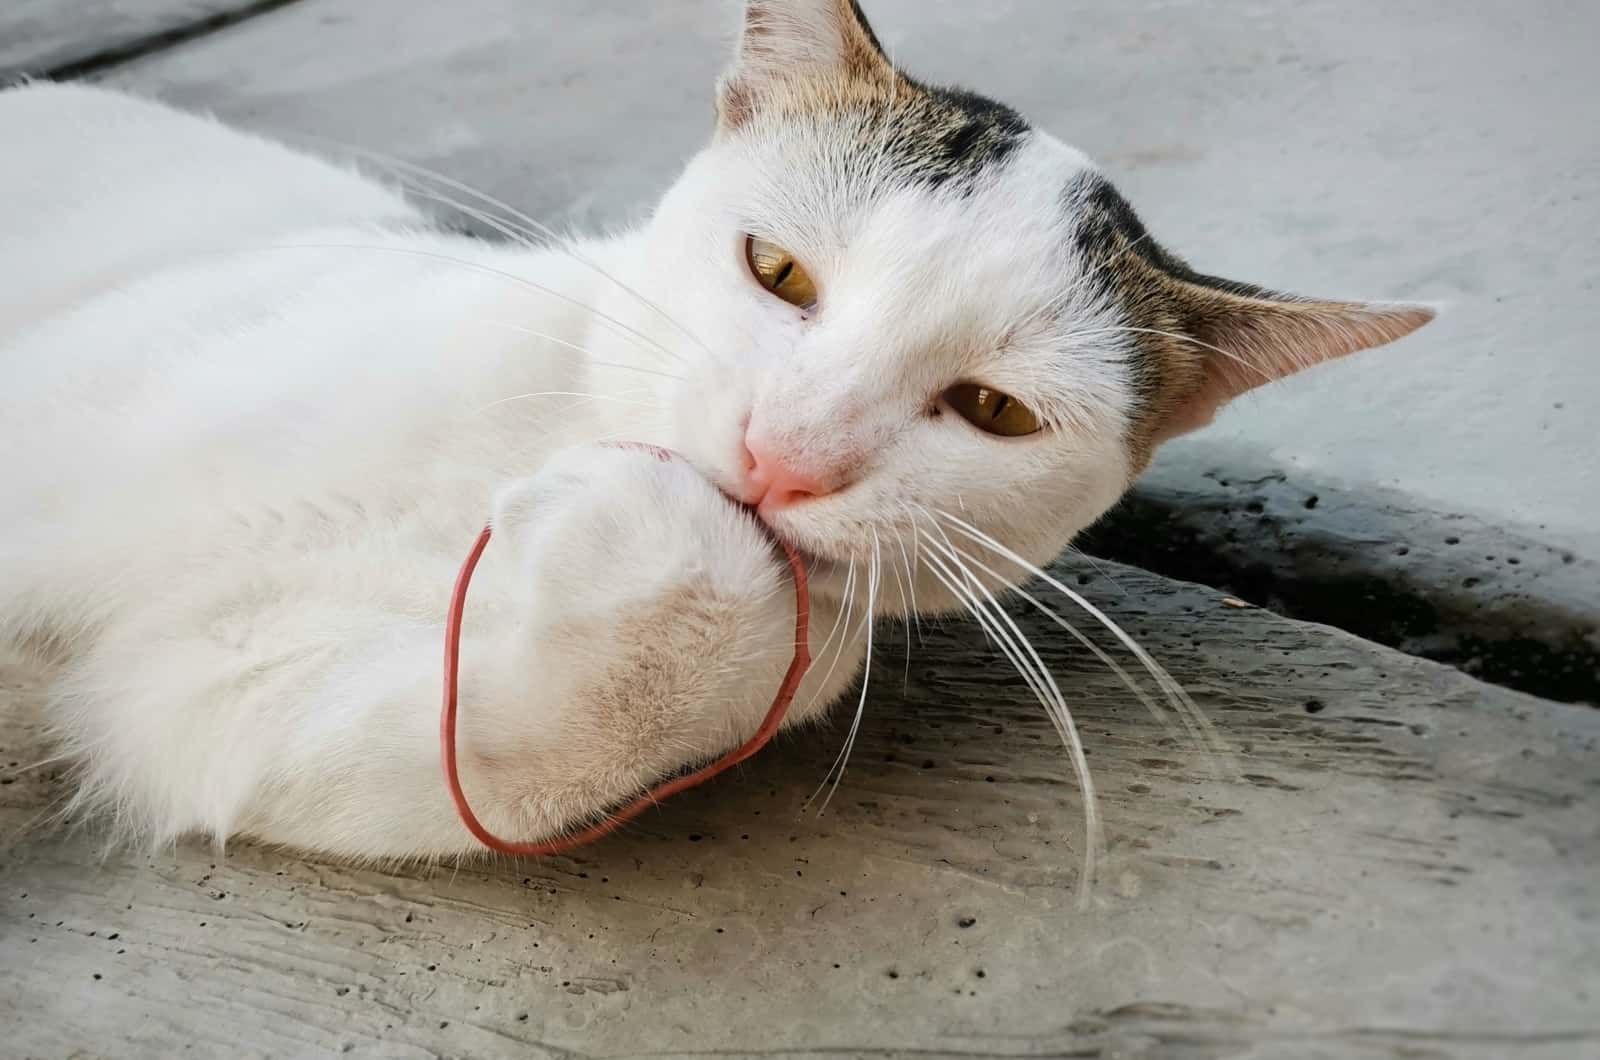 white cat biting Rubber Band